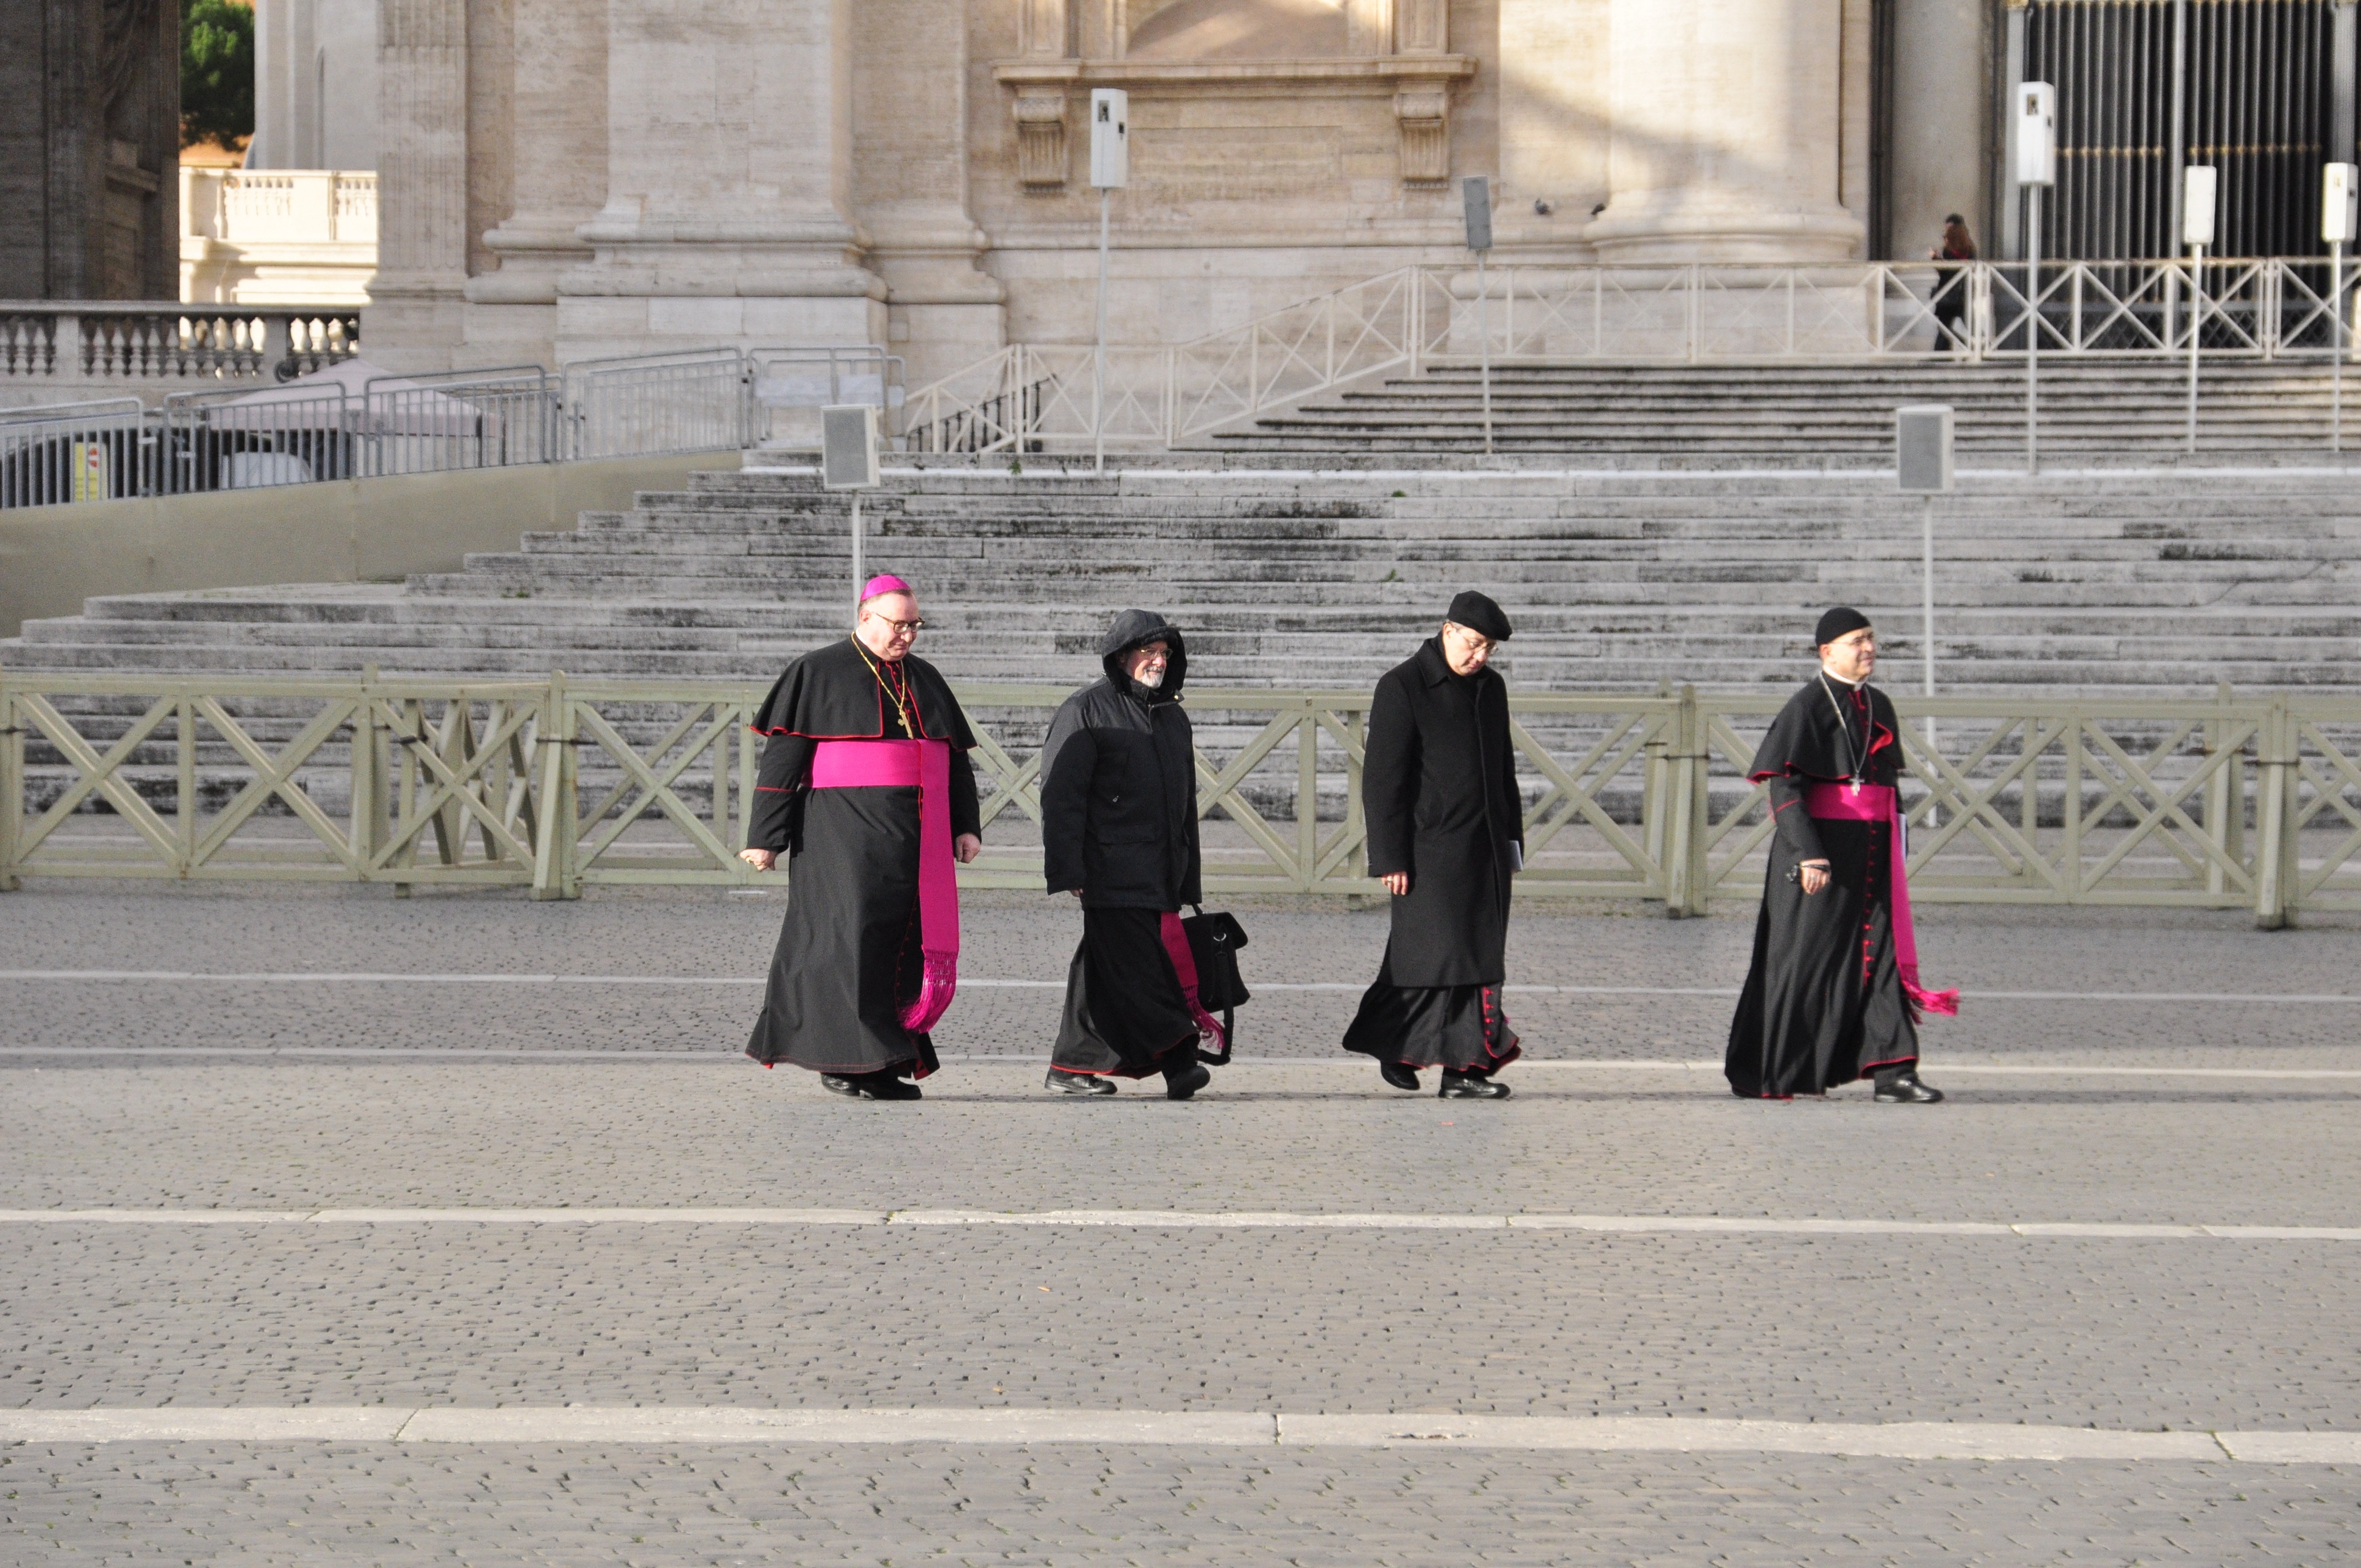 four pope walking on pathway during day time